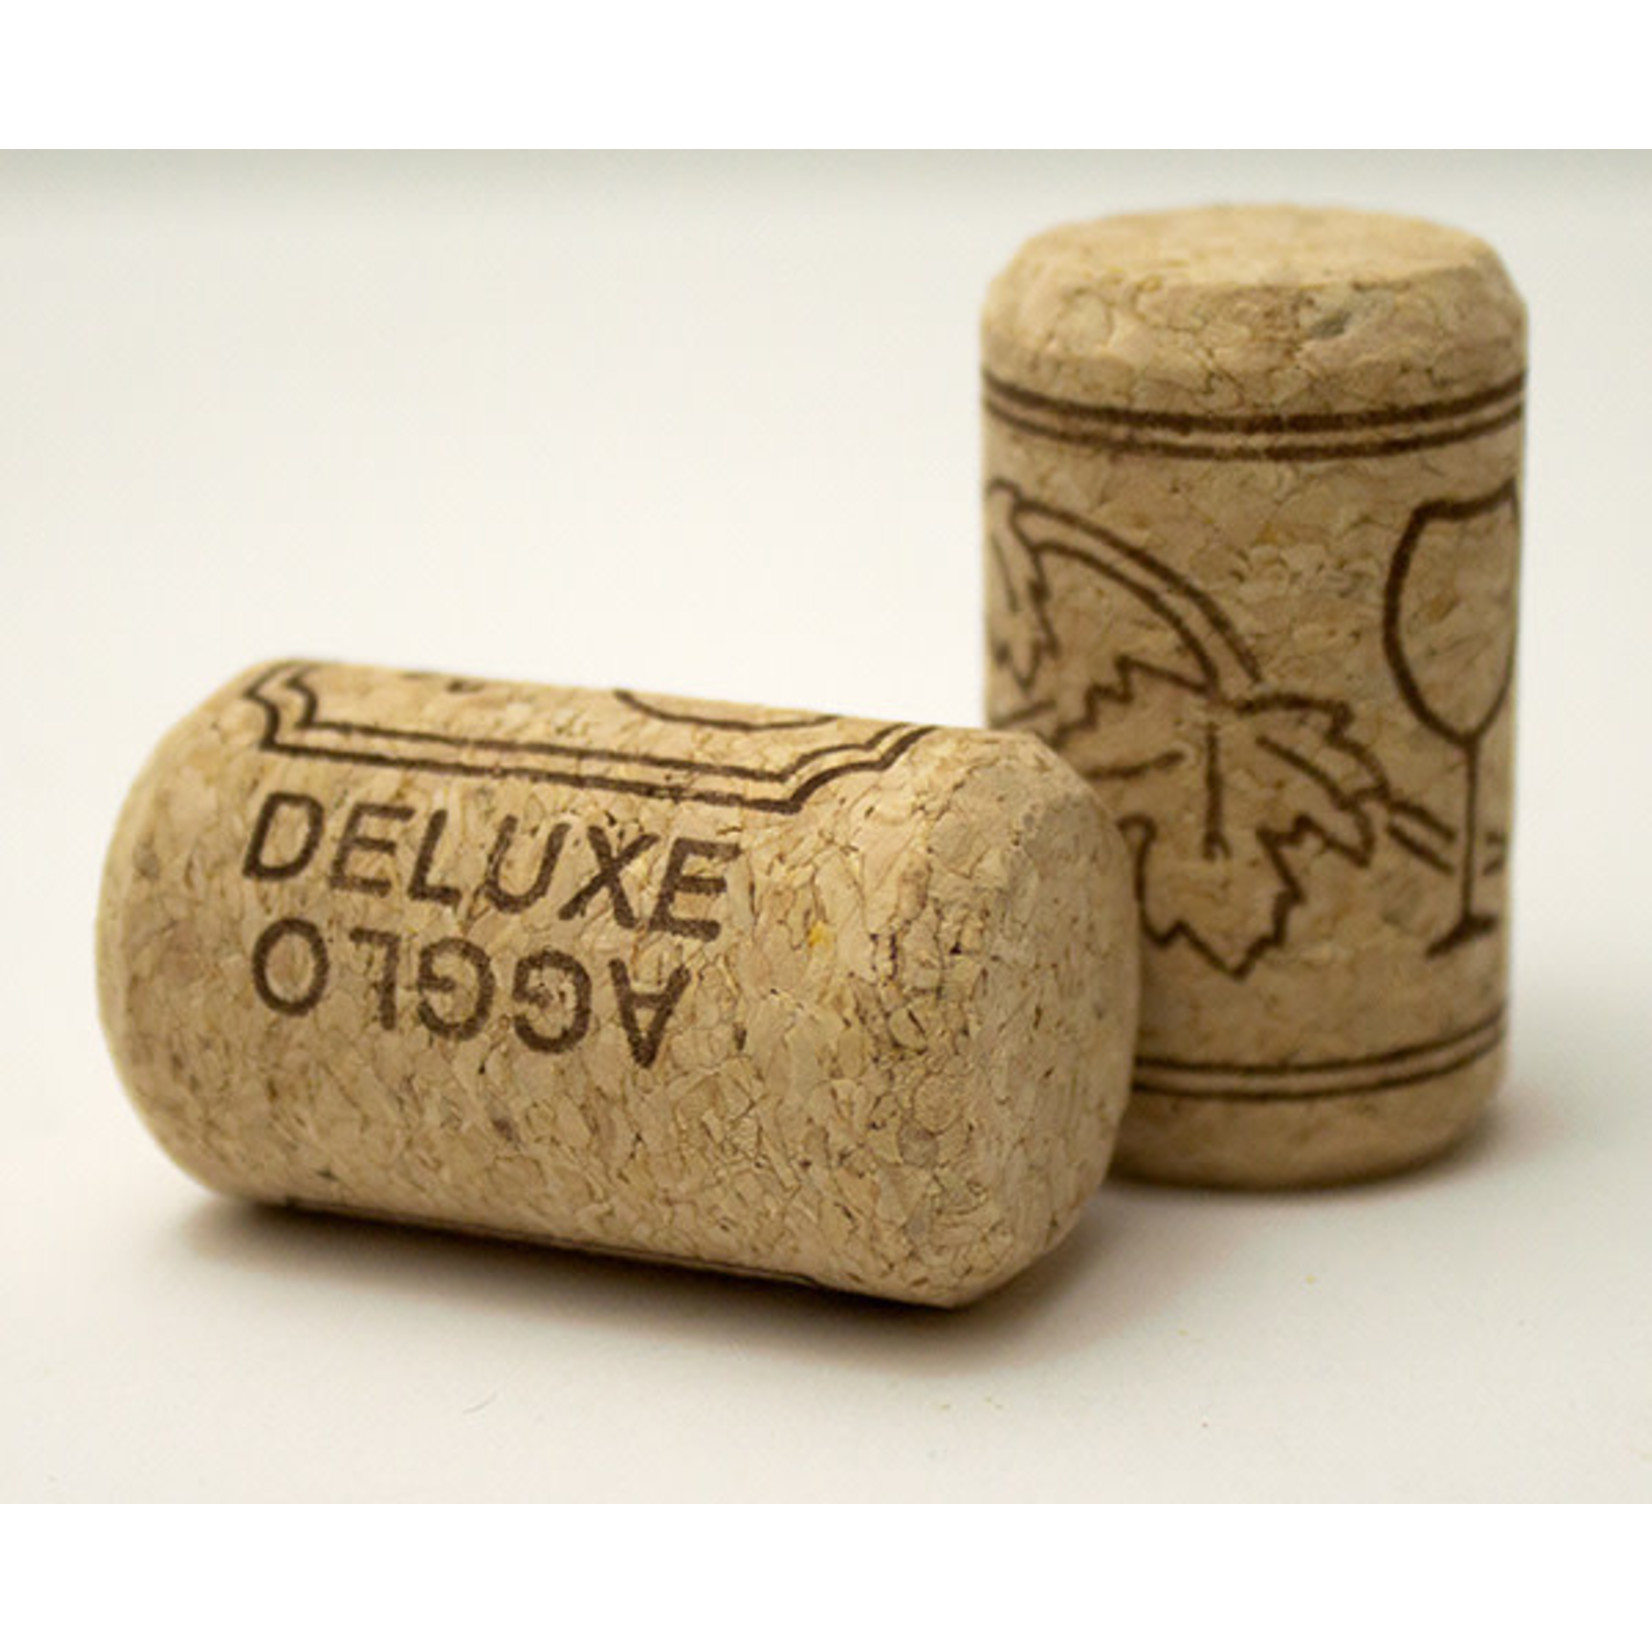 Deluxe Agglomerated Wine Cork 38 x 22mm 30ct.